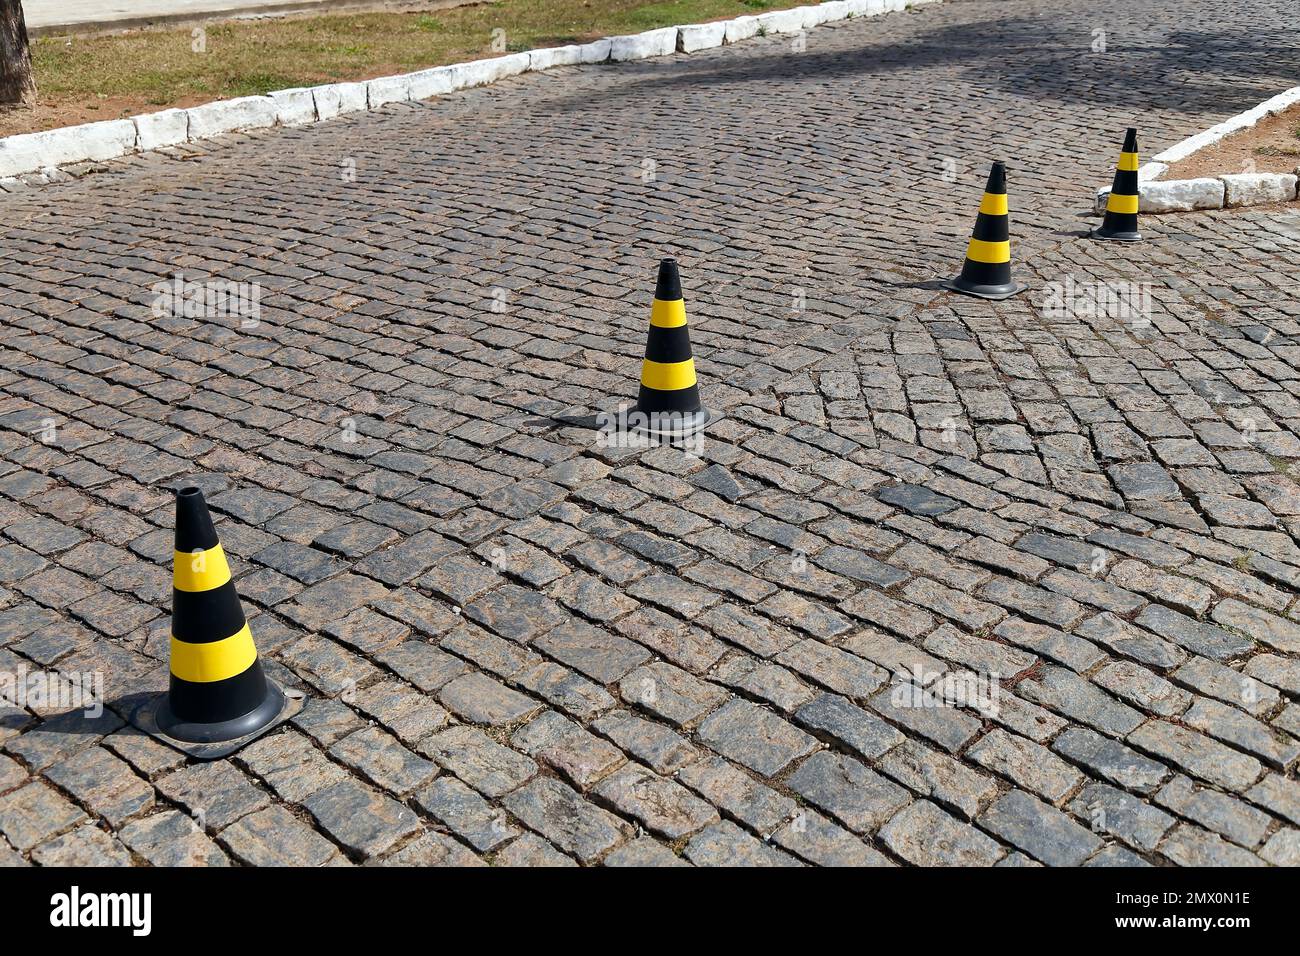 traffic signal cone yellow and black colors, hard plastic, on stone public road Stock Photo